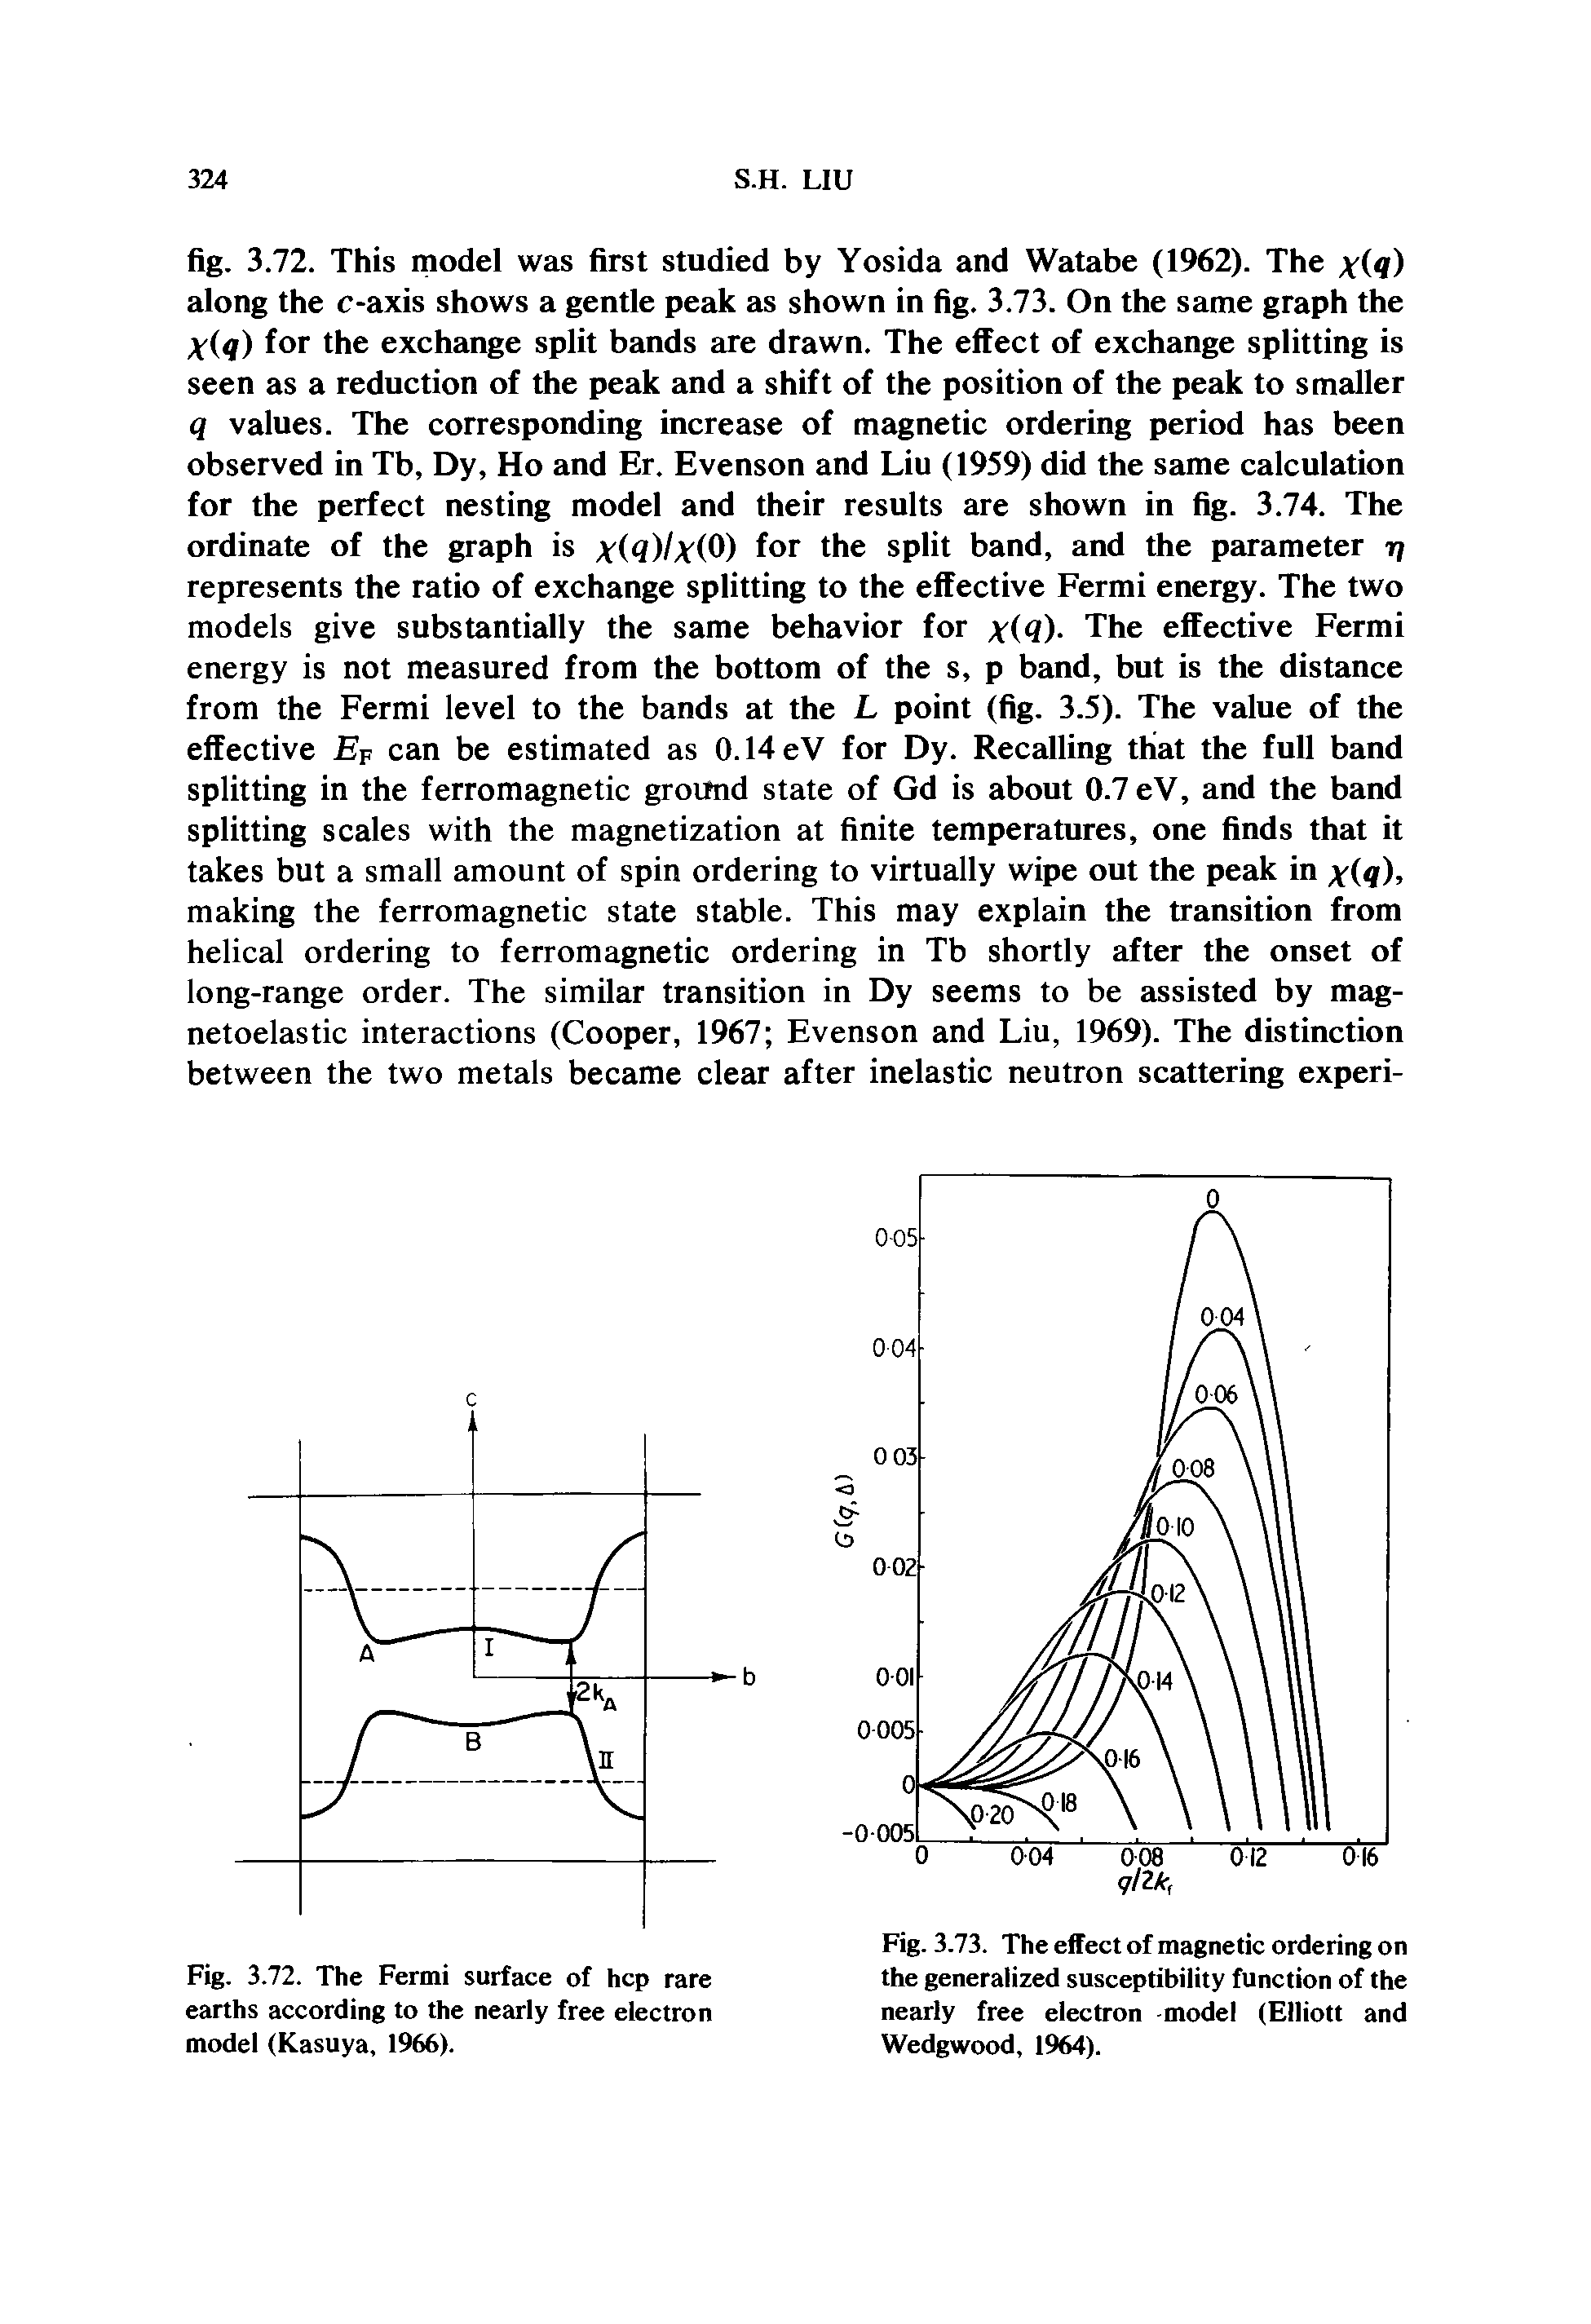 Fig. 3.73. The effect of magnetic ordering on the generalized susceptibility function of the nearly free electron -model (Elliott and Wedgwood, 1964).